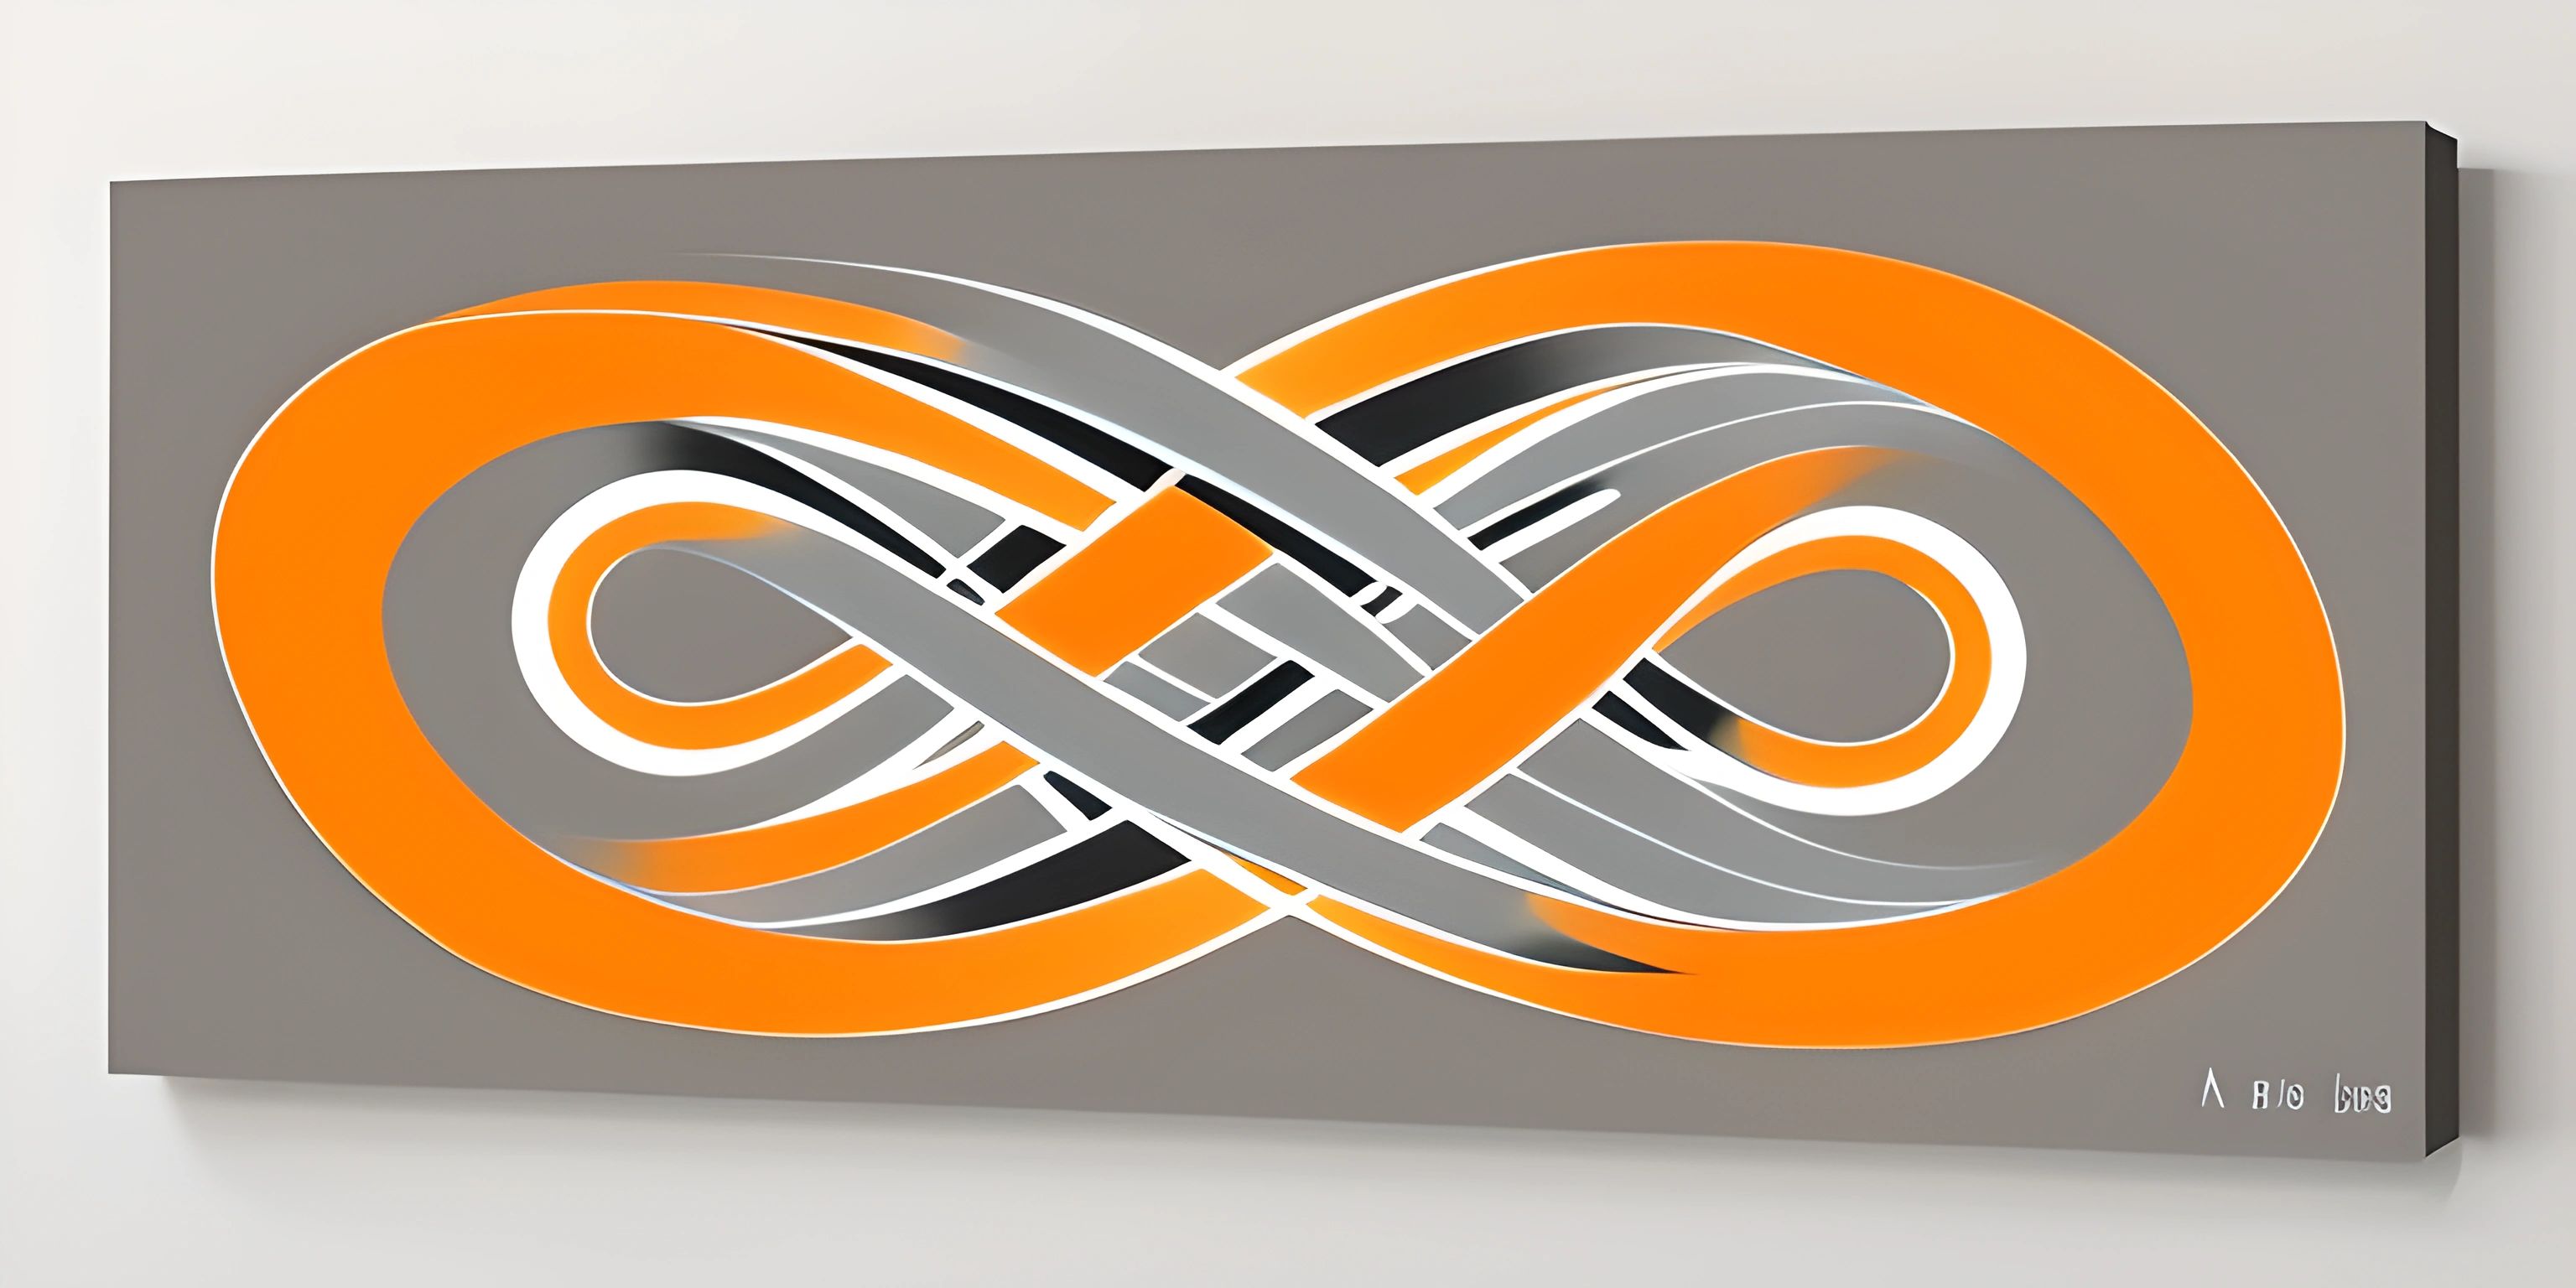 an image of a wall painting with an orange and grey color scheme featuring two infinite loops